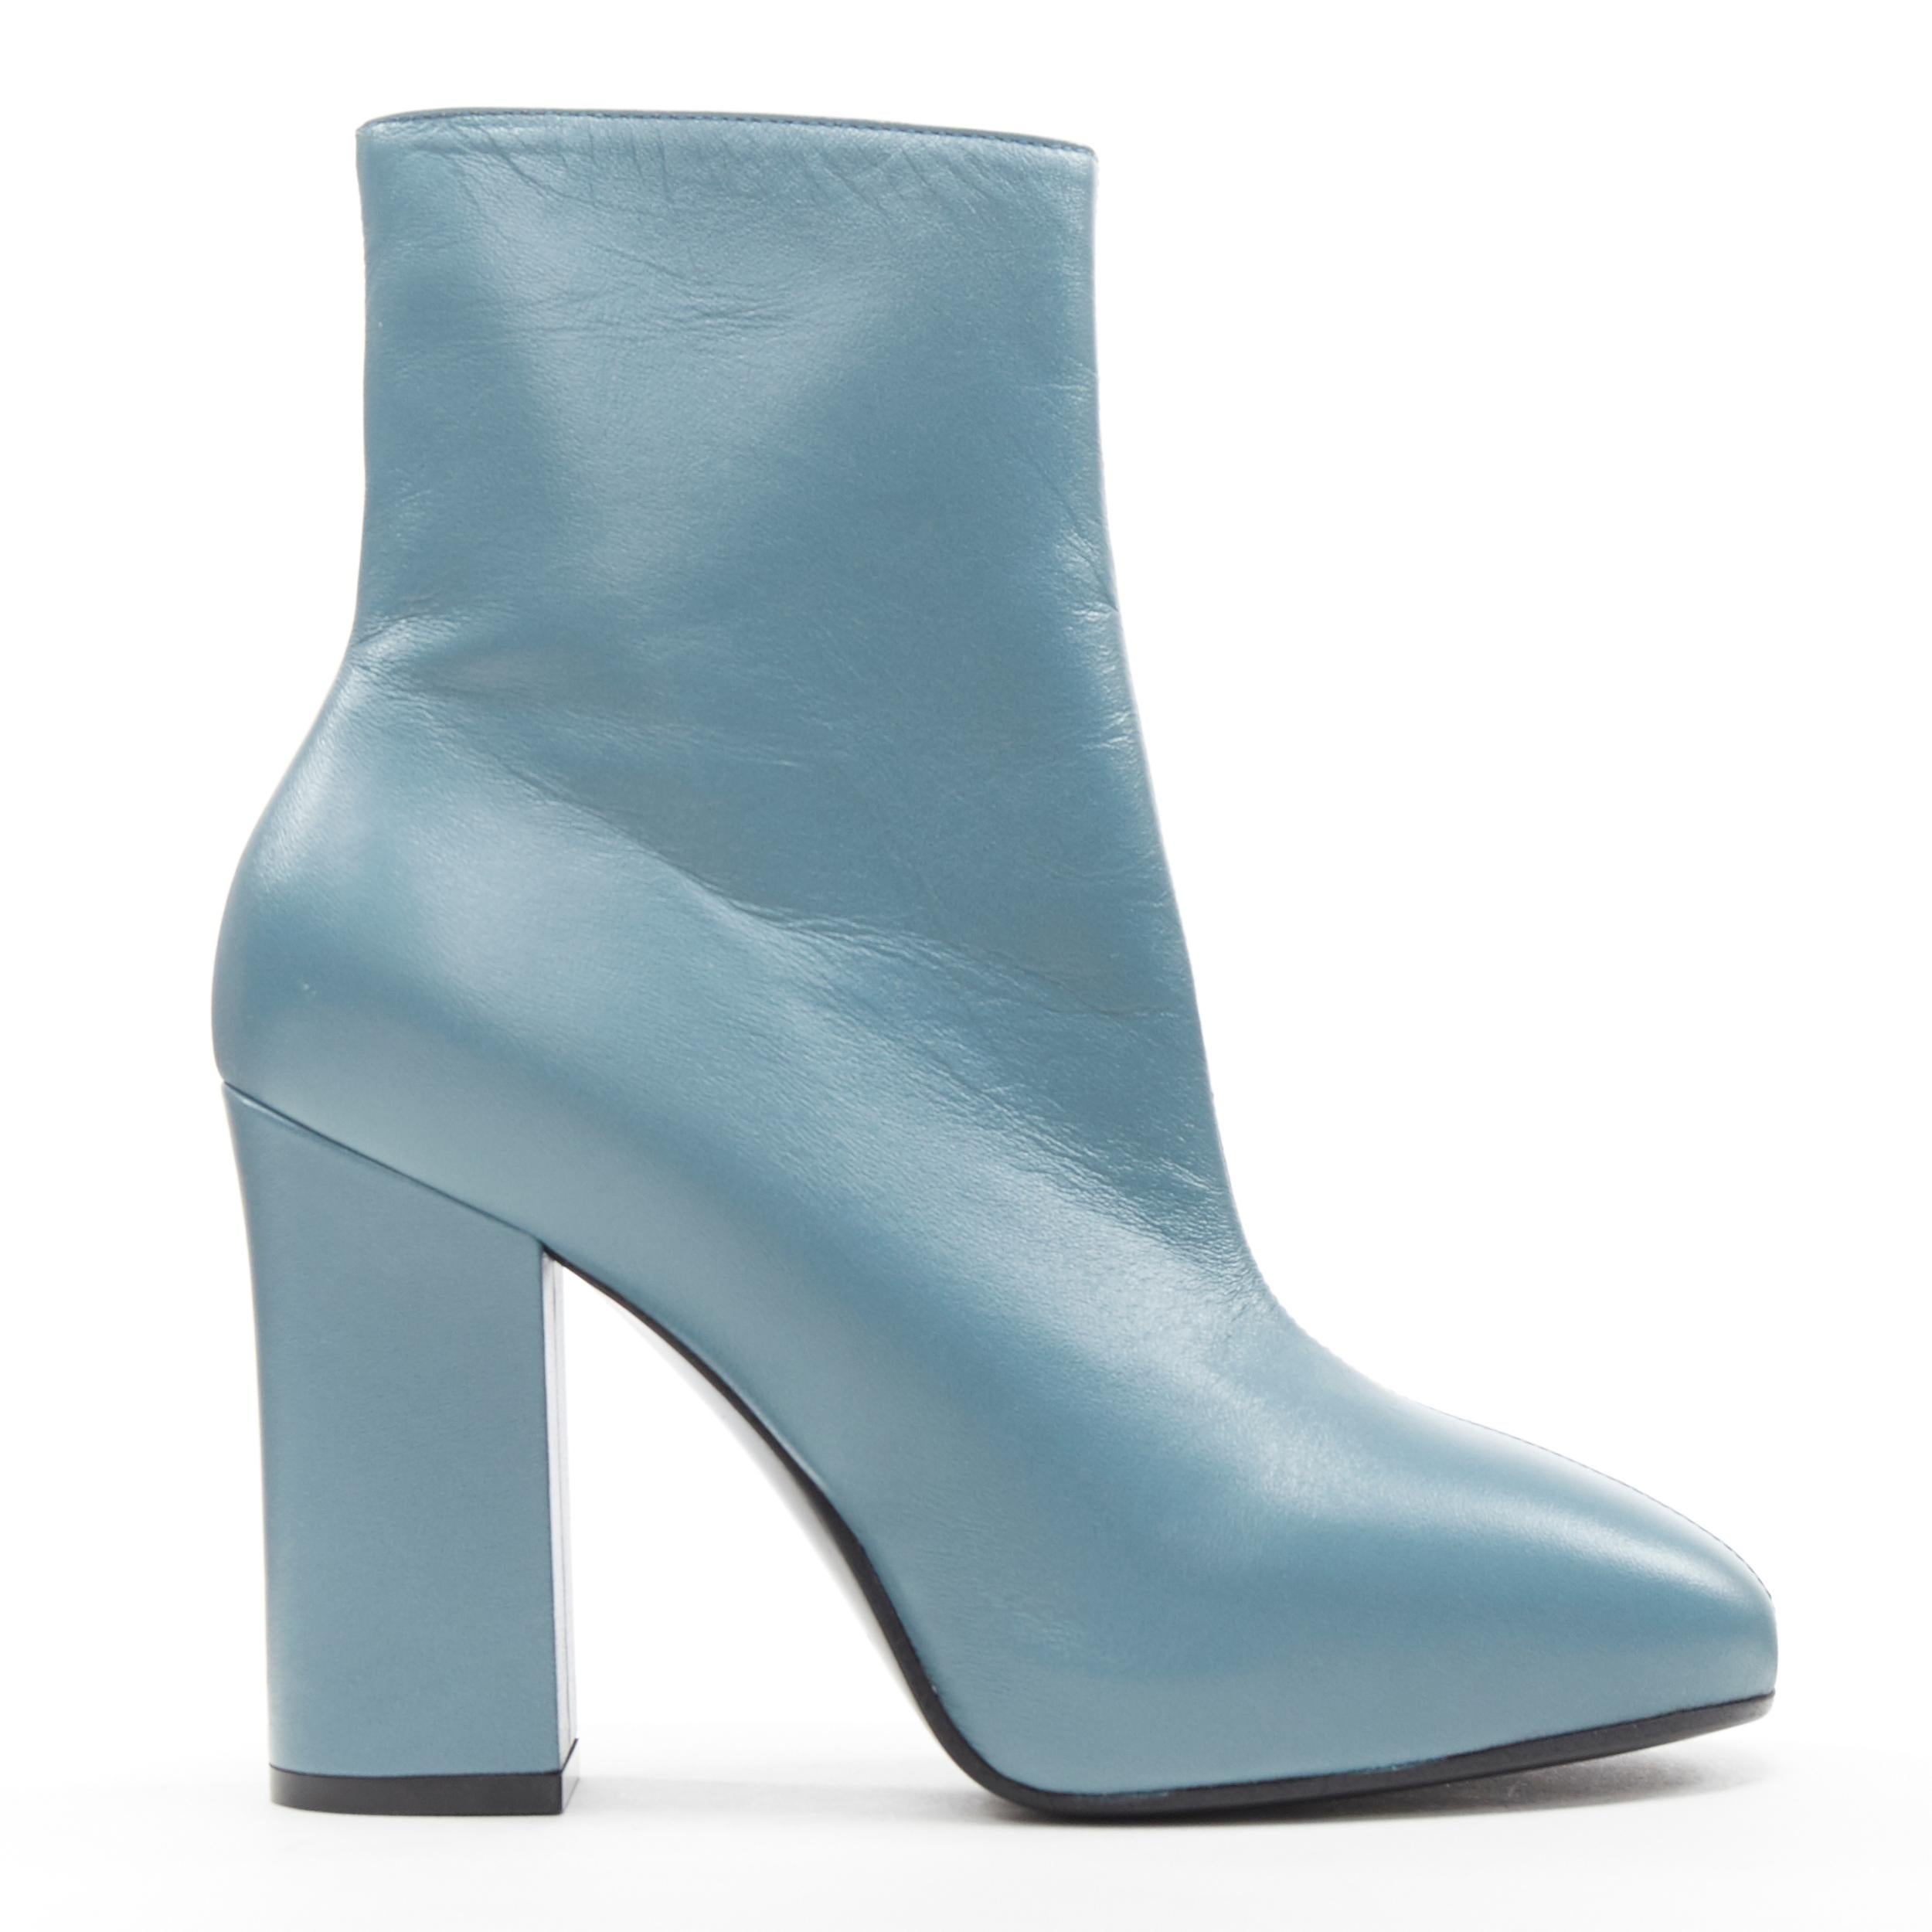 new DRIES VAN NOTEN teal blue floral rose print chunky heel ankle boot EU37
Brand: Dries Van Noten
Designer: Dries Van Noten
Model Name / Style: Leather boot
Material: Leather
Color: Blue
Pattern: Floral
Closure: Zip
Extra Detail: Floral print on